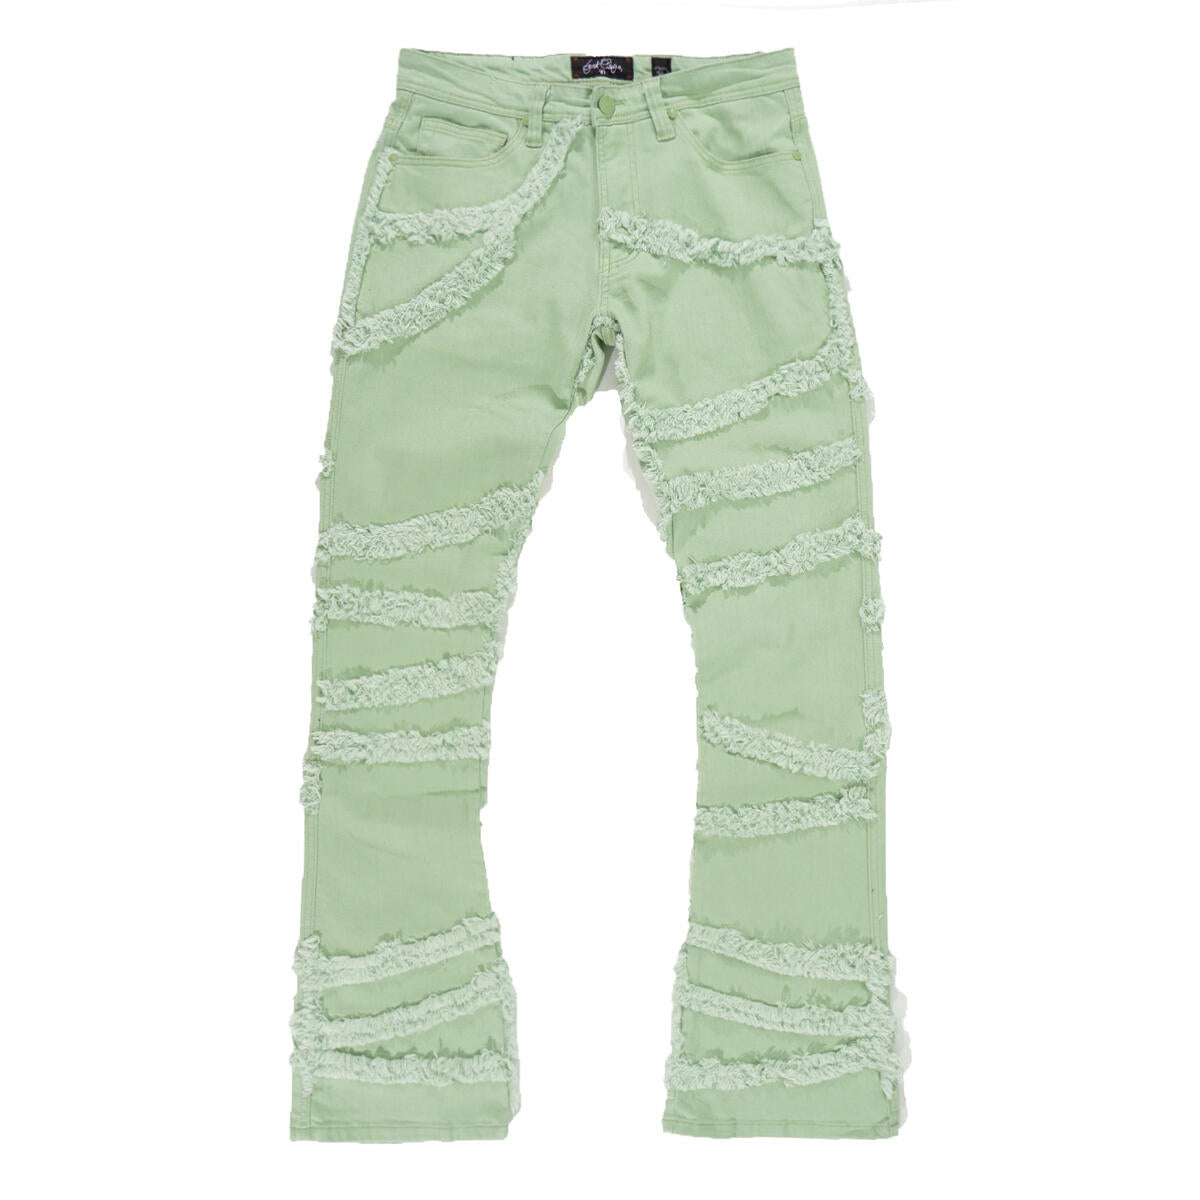 Leon Stacked Jeans - Light Olive - F1705